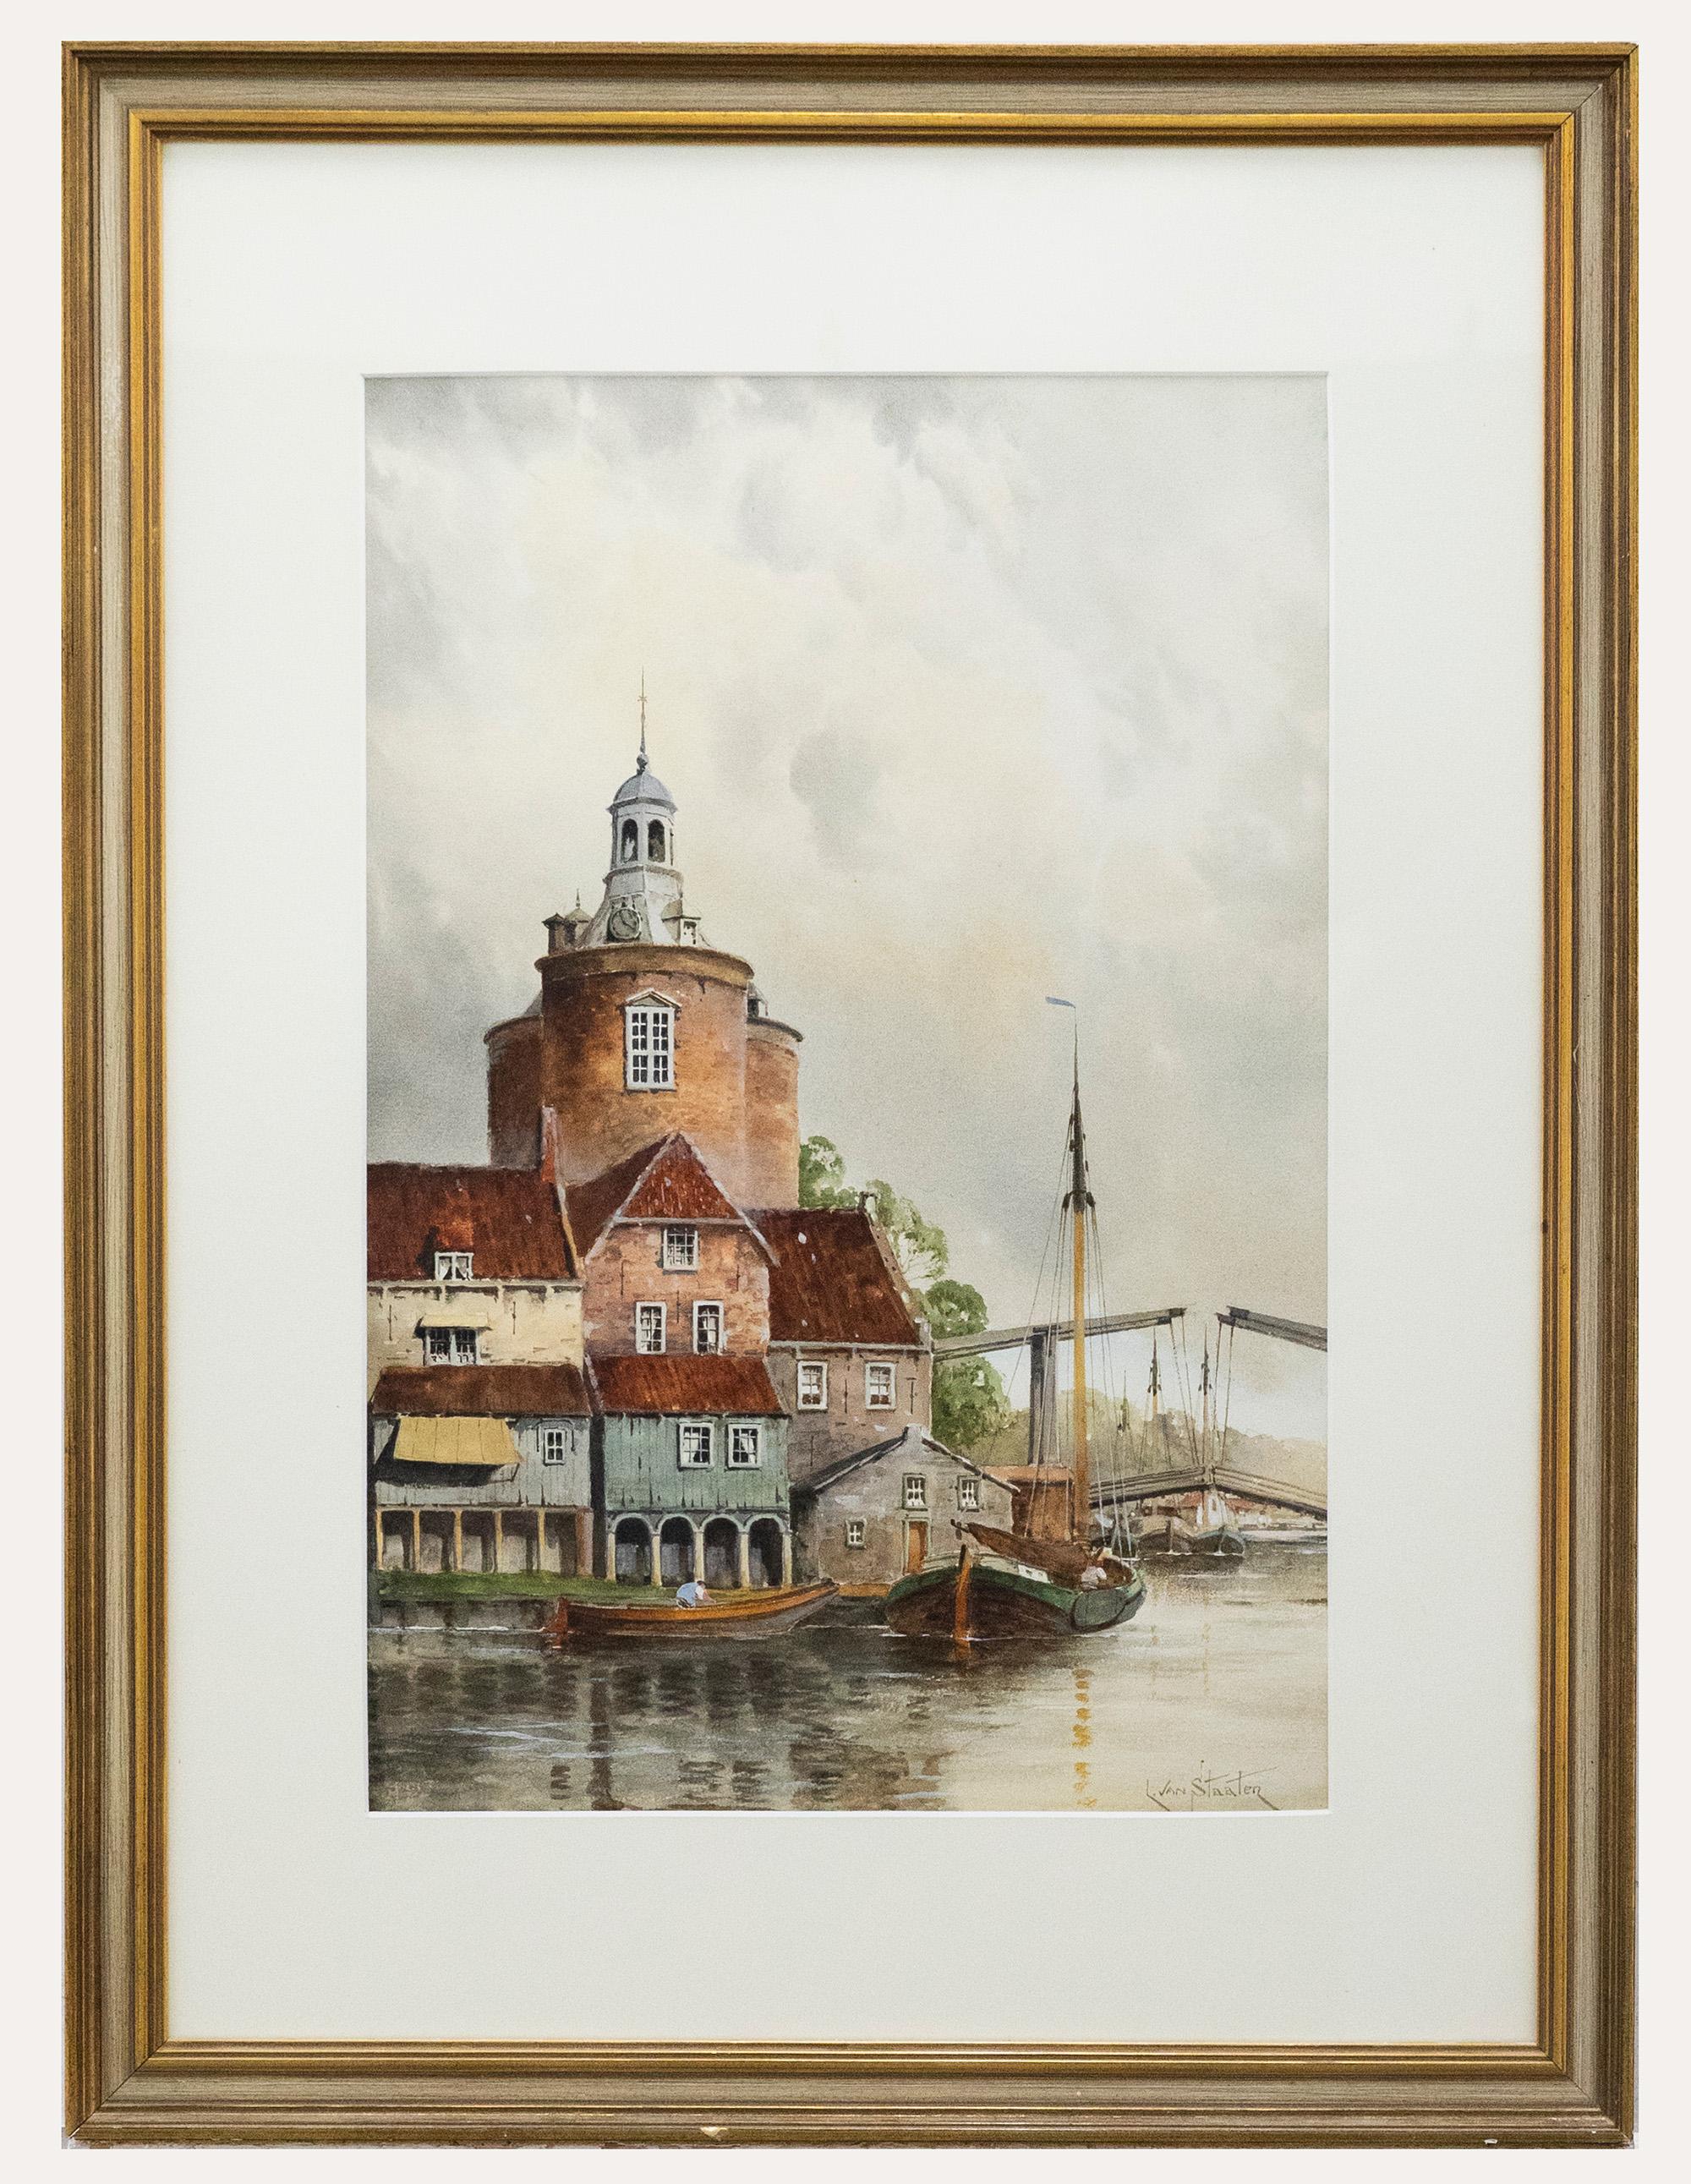 A charming watercolour scene by the listed Dutch artist Louis Van Staaten. The scene shows an idyllic river landscape with a drawbridge in the background, parting ways for two oncoming boats. Signed to the lower Right. Well-presented in a